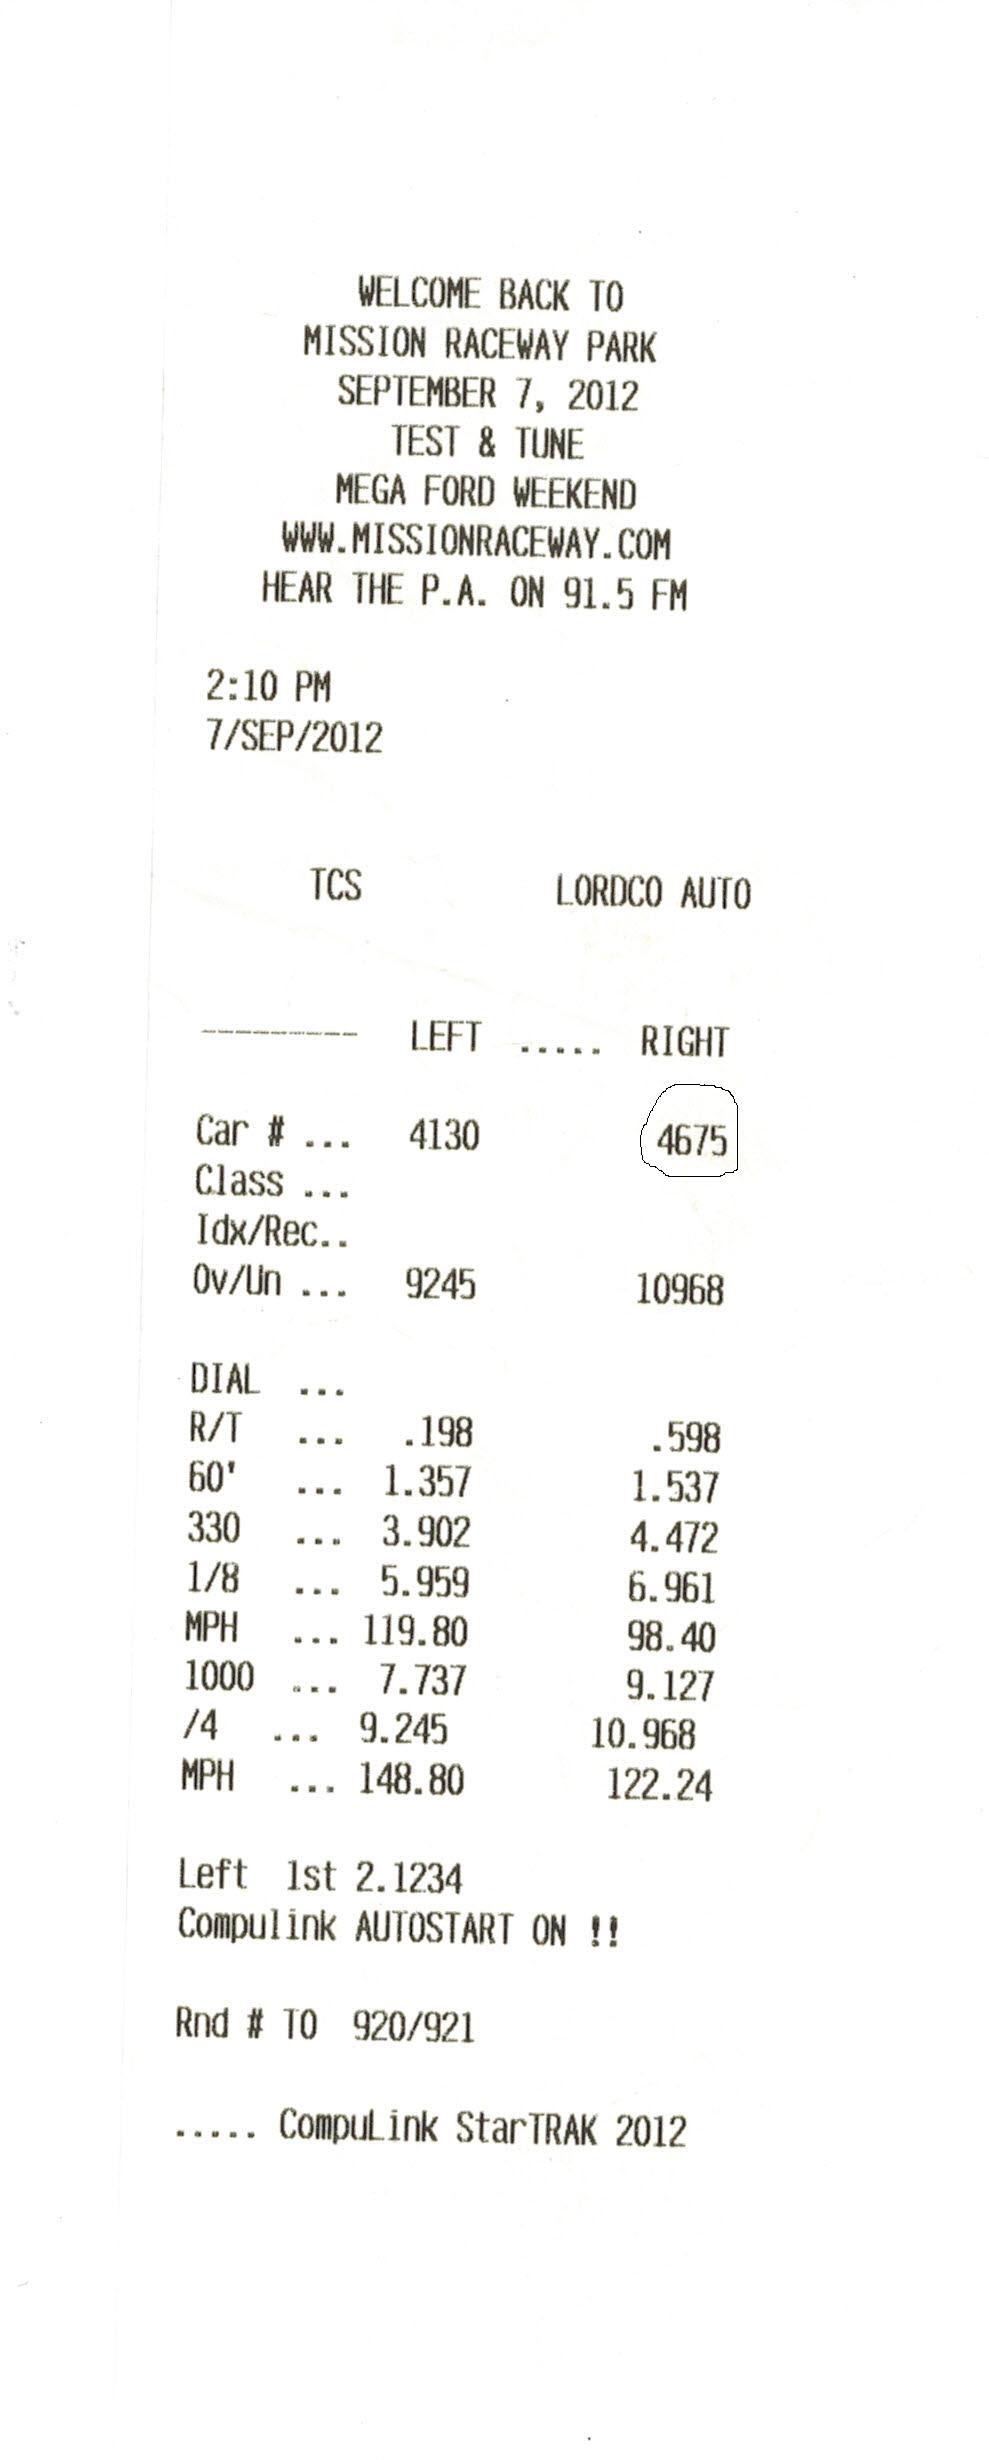 1979 White Ford Mustang LX Timeslip Scan